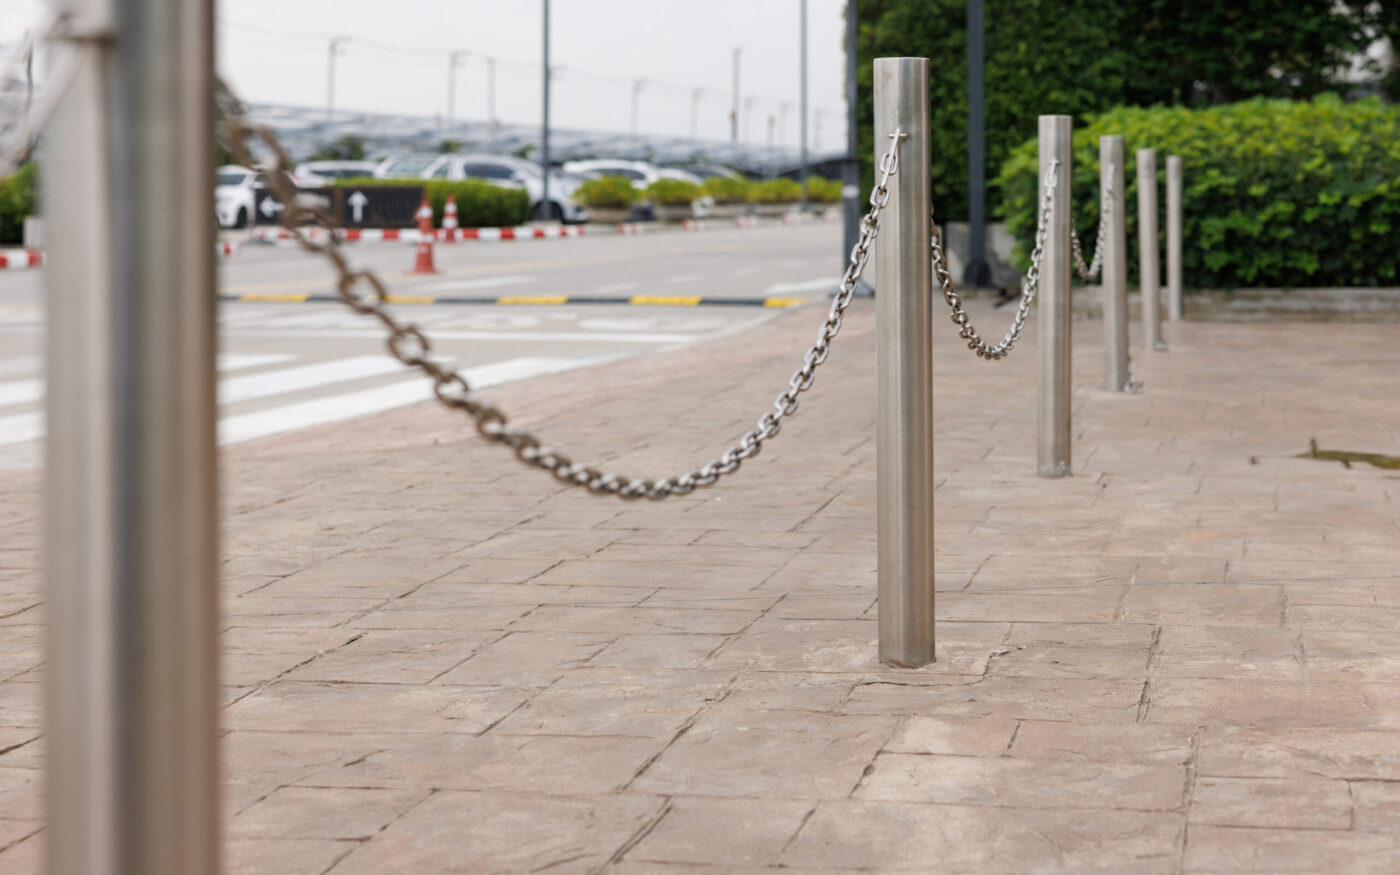 stainless steel bollards with metal chain on concrete pavement.